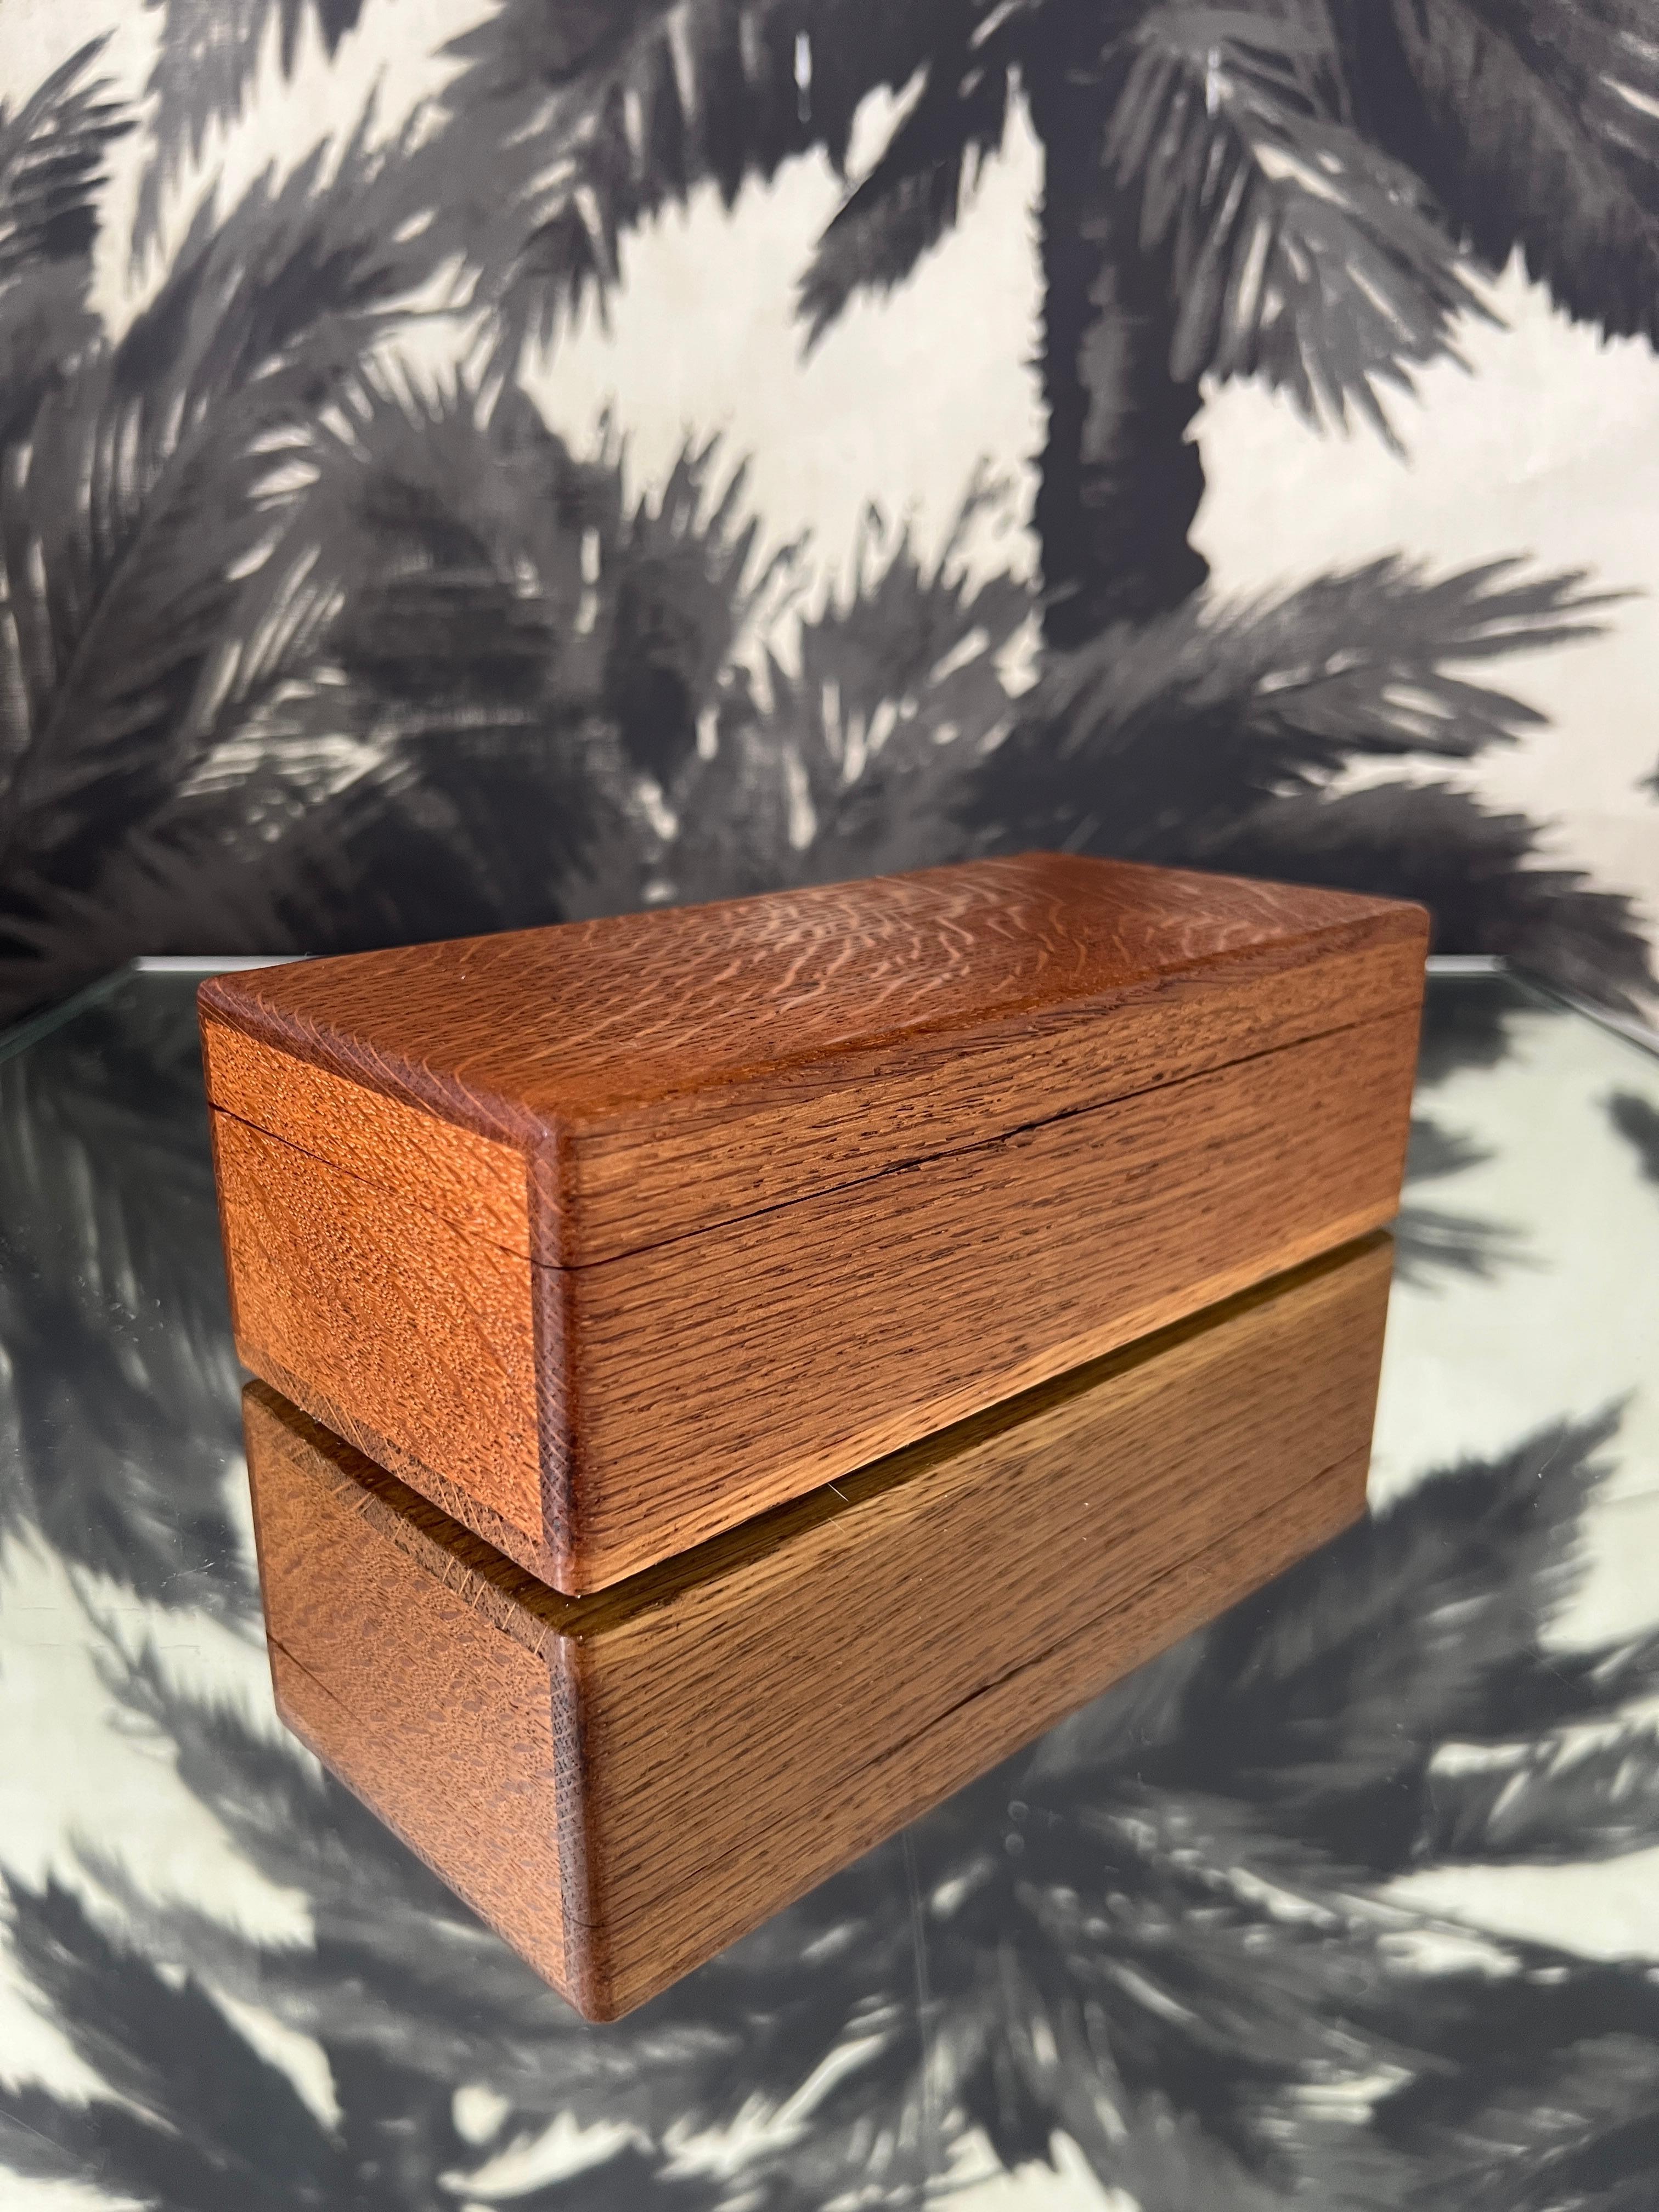 Handcrafted Art Deco era keepsake box in tiger oak wood. The box has a streamline design featuring two wood colorations and is fitted with double interior compartments for jewelry or trinket storage. Makes a handsome desk or dresser accessory.